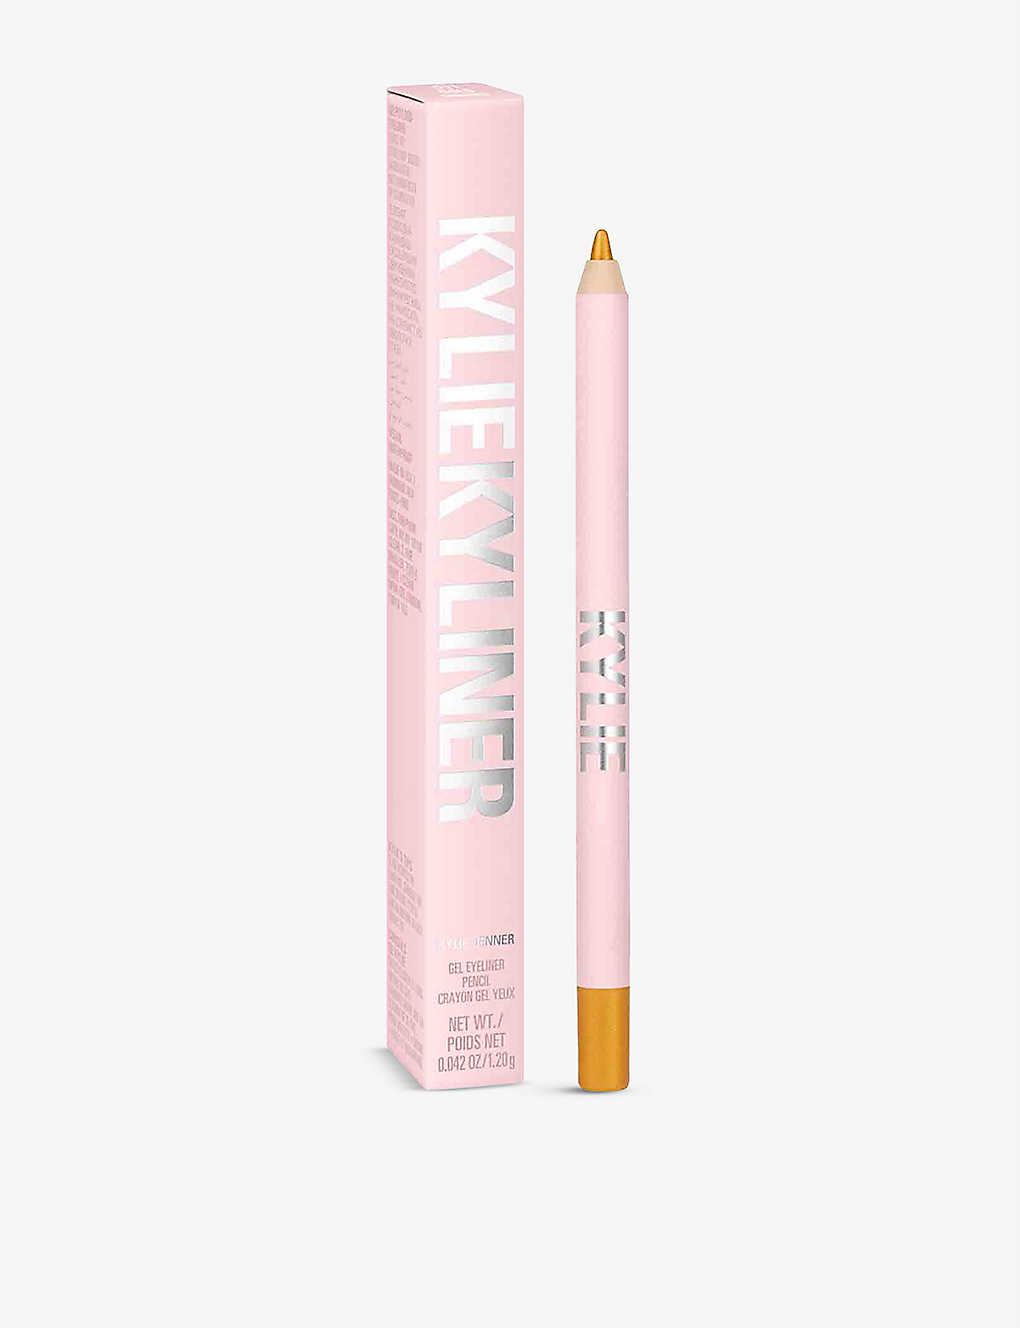 Kylie By Kylie Jenner Kyliner Gel Pencil 4.25g In 011 Shimmery Gold